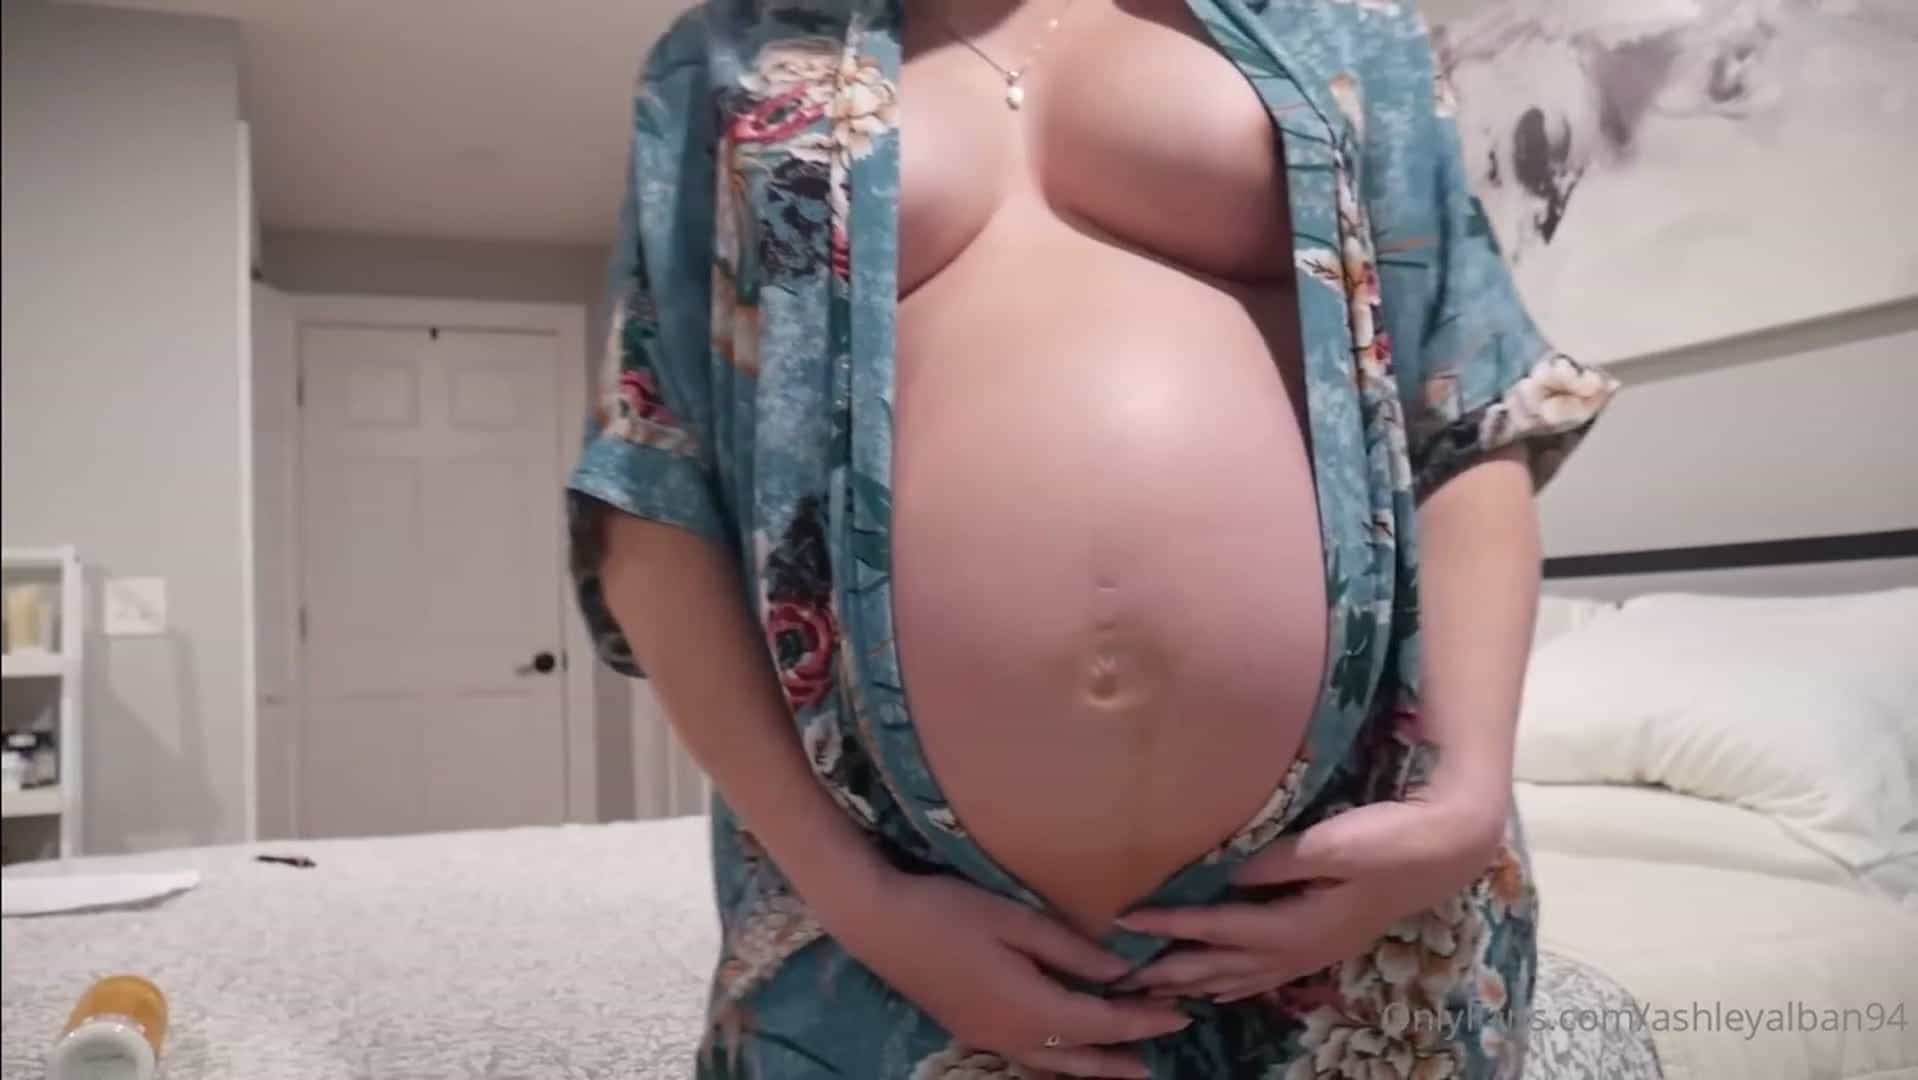 Showing off her Pregnant Body